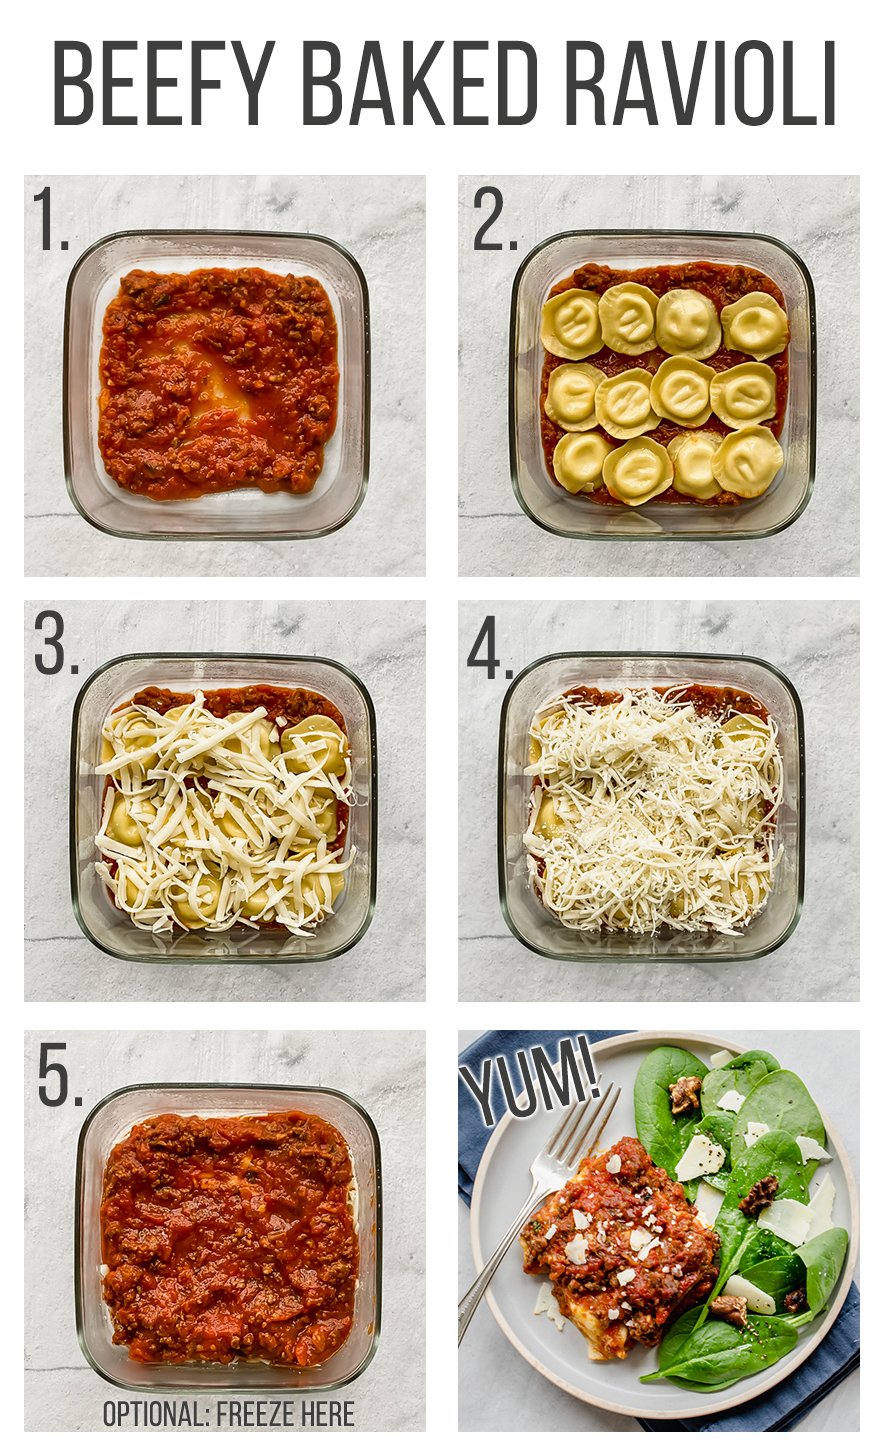 Step by step images for beefy baked ravioli.